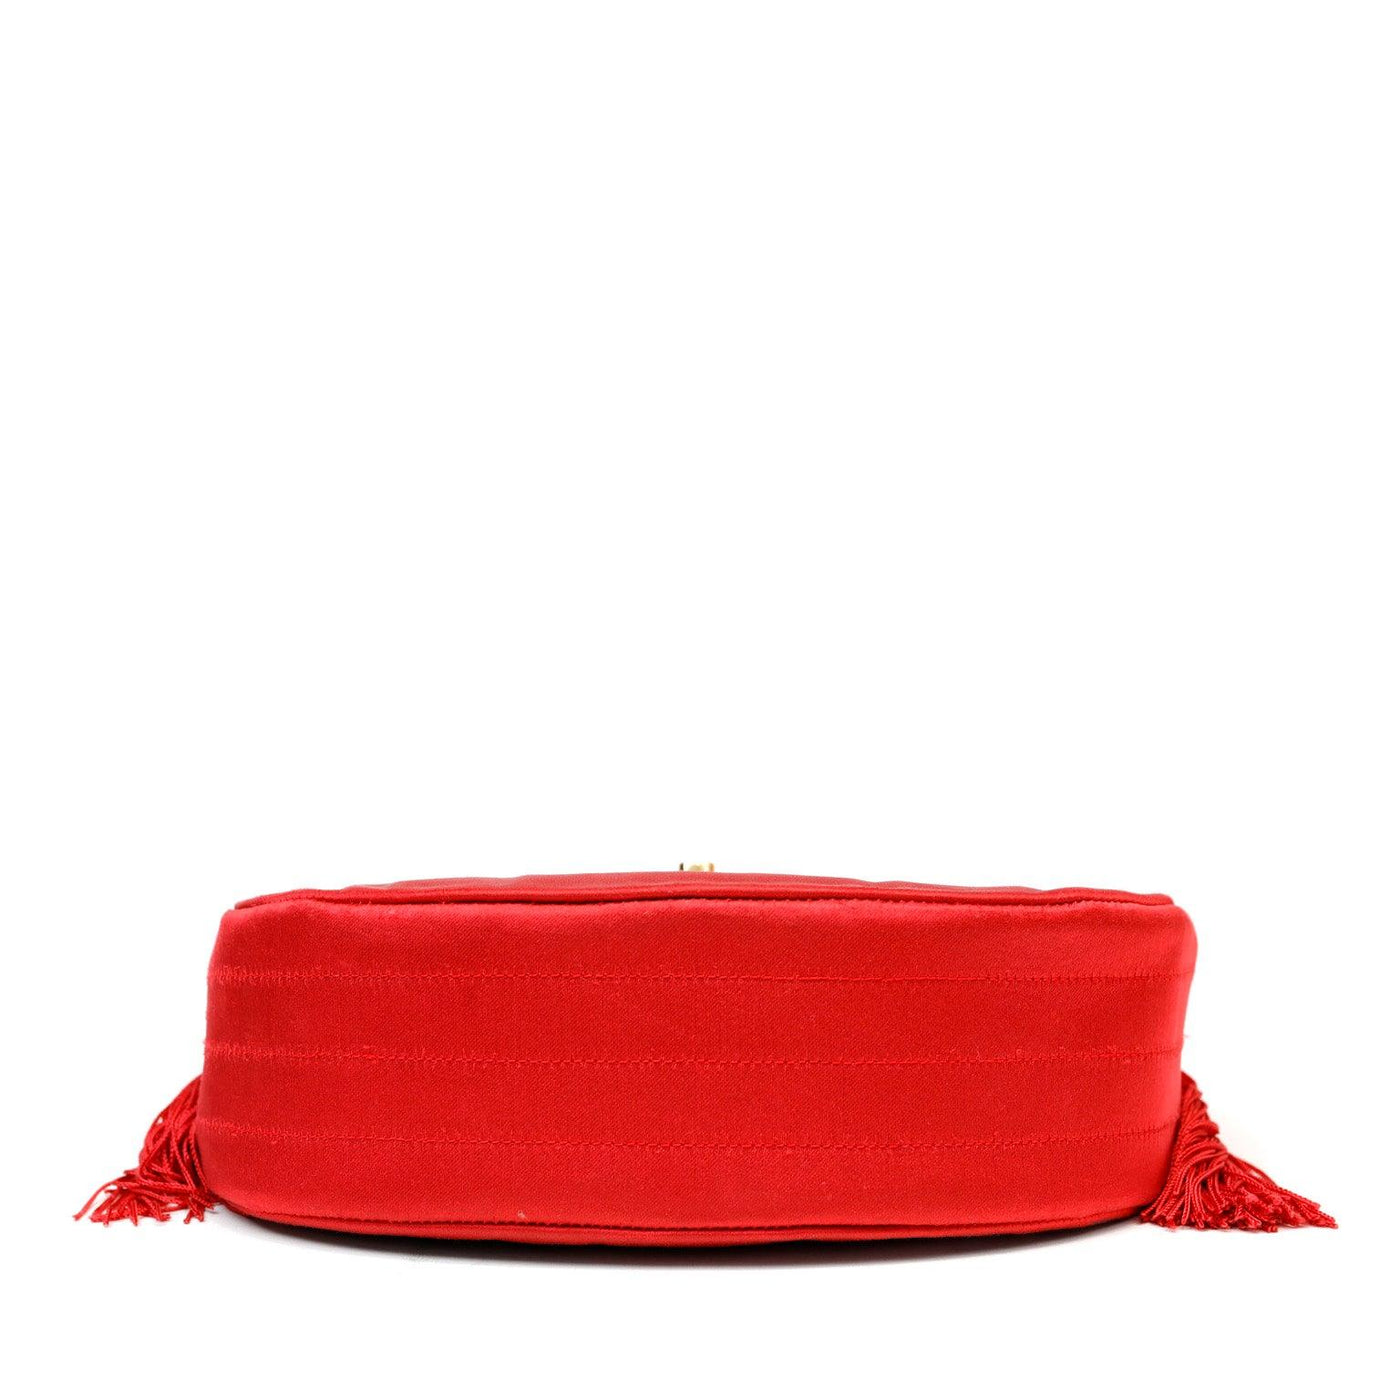 Chanel Red Satin Vintage Evening Crossbody Bag - Only Authentics